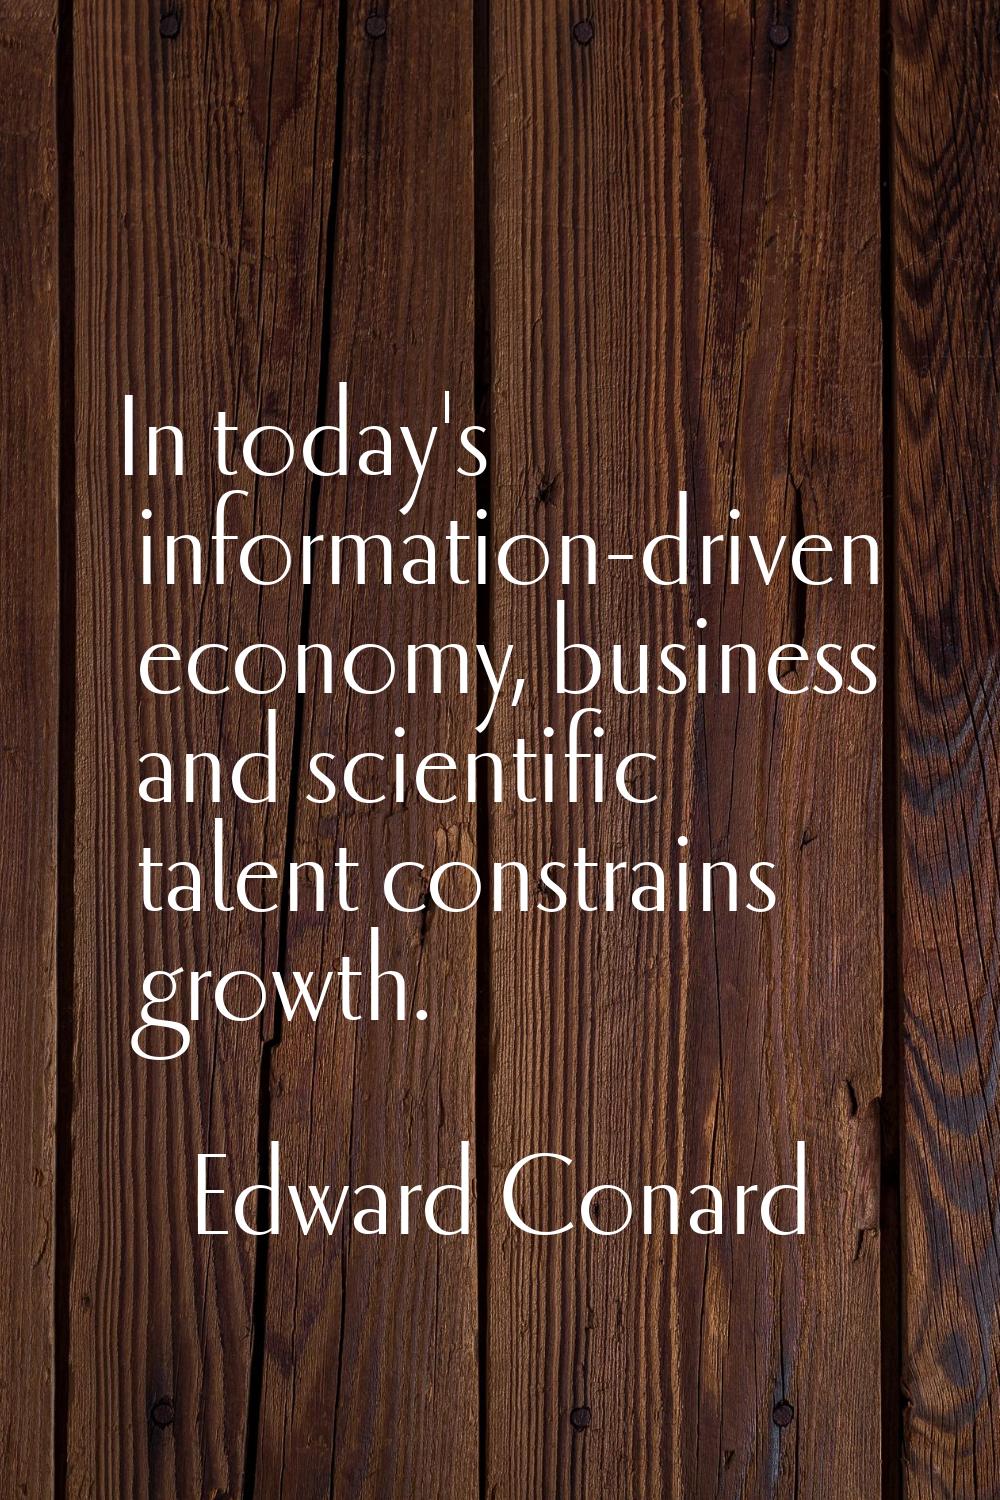 In today's information-driven economy, business and scientific talent constrains growth.